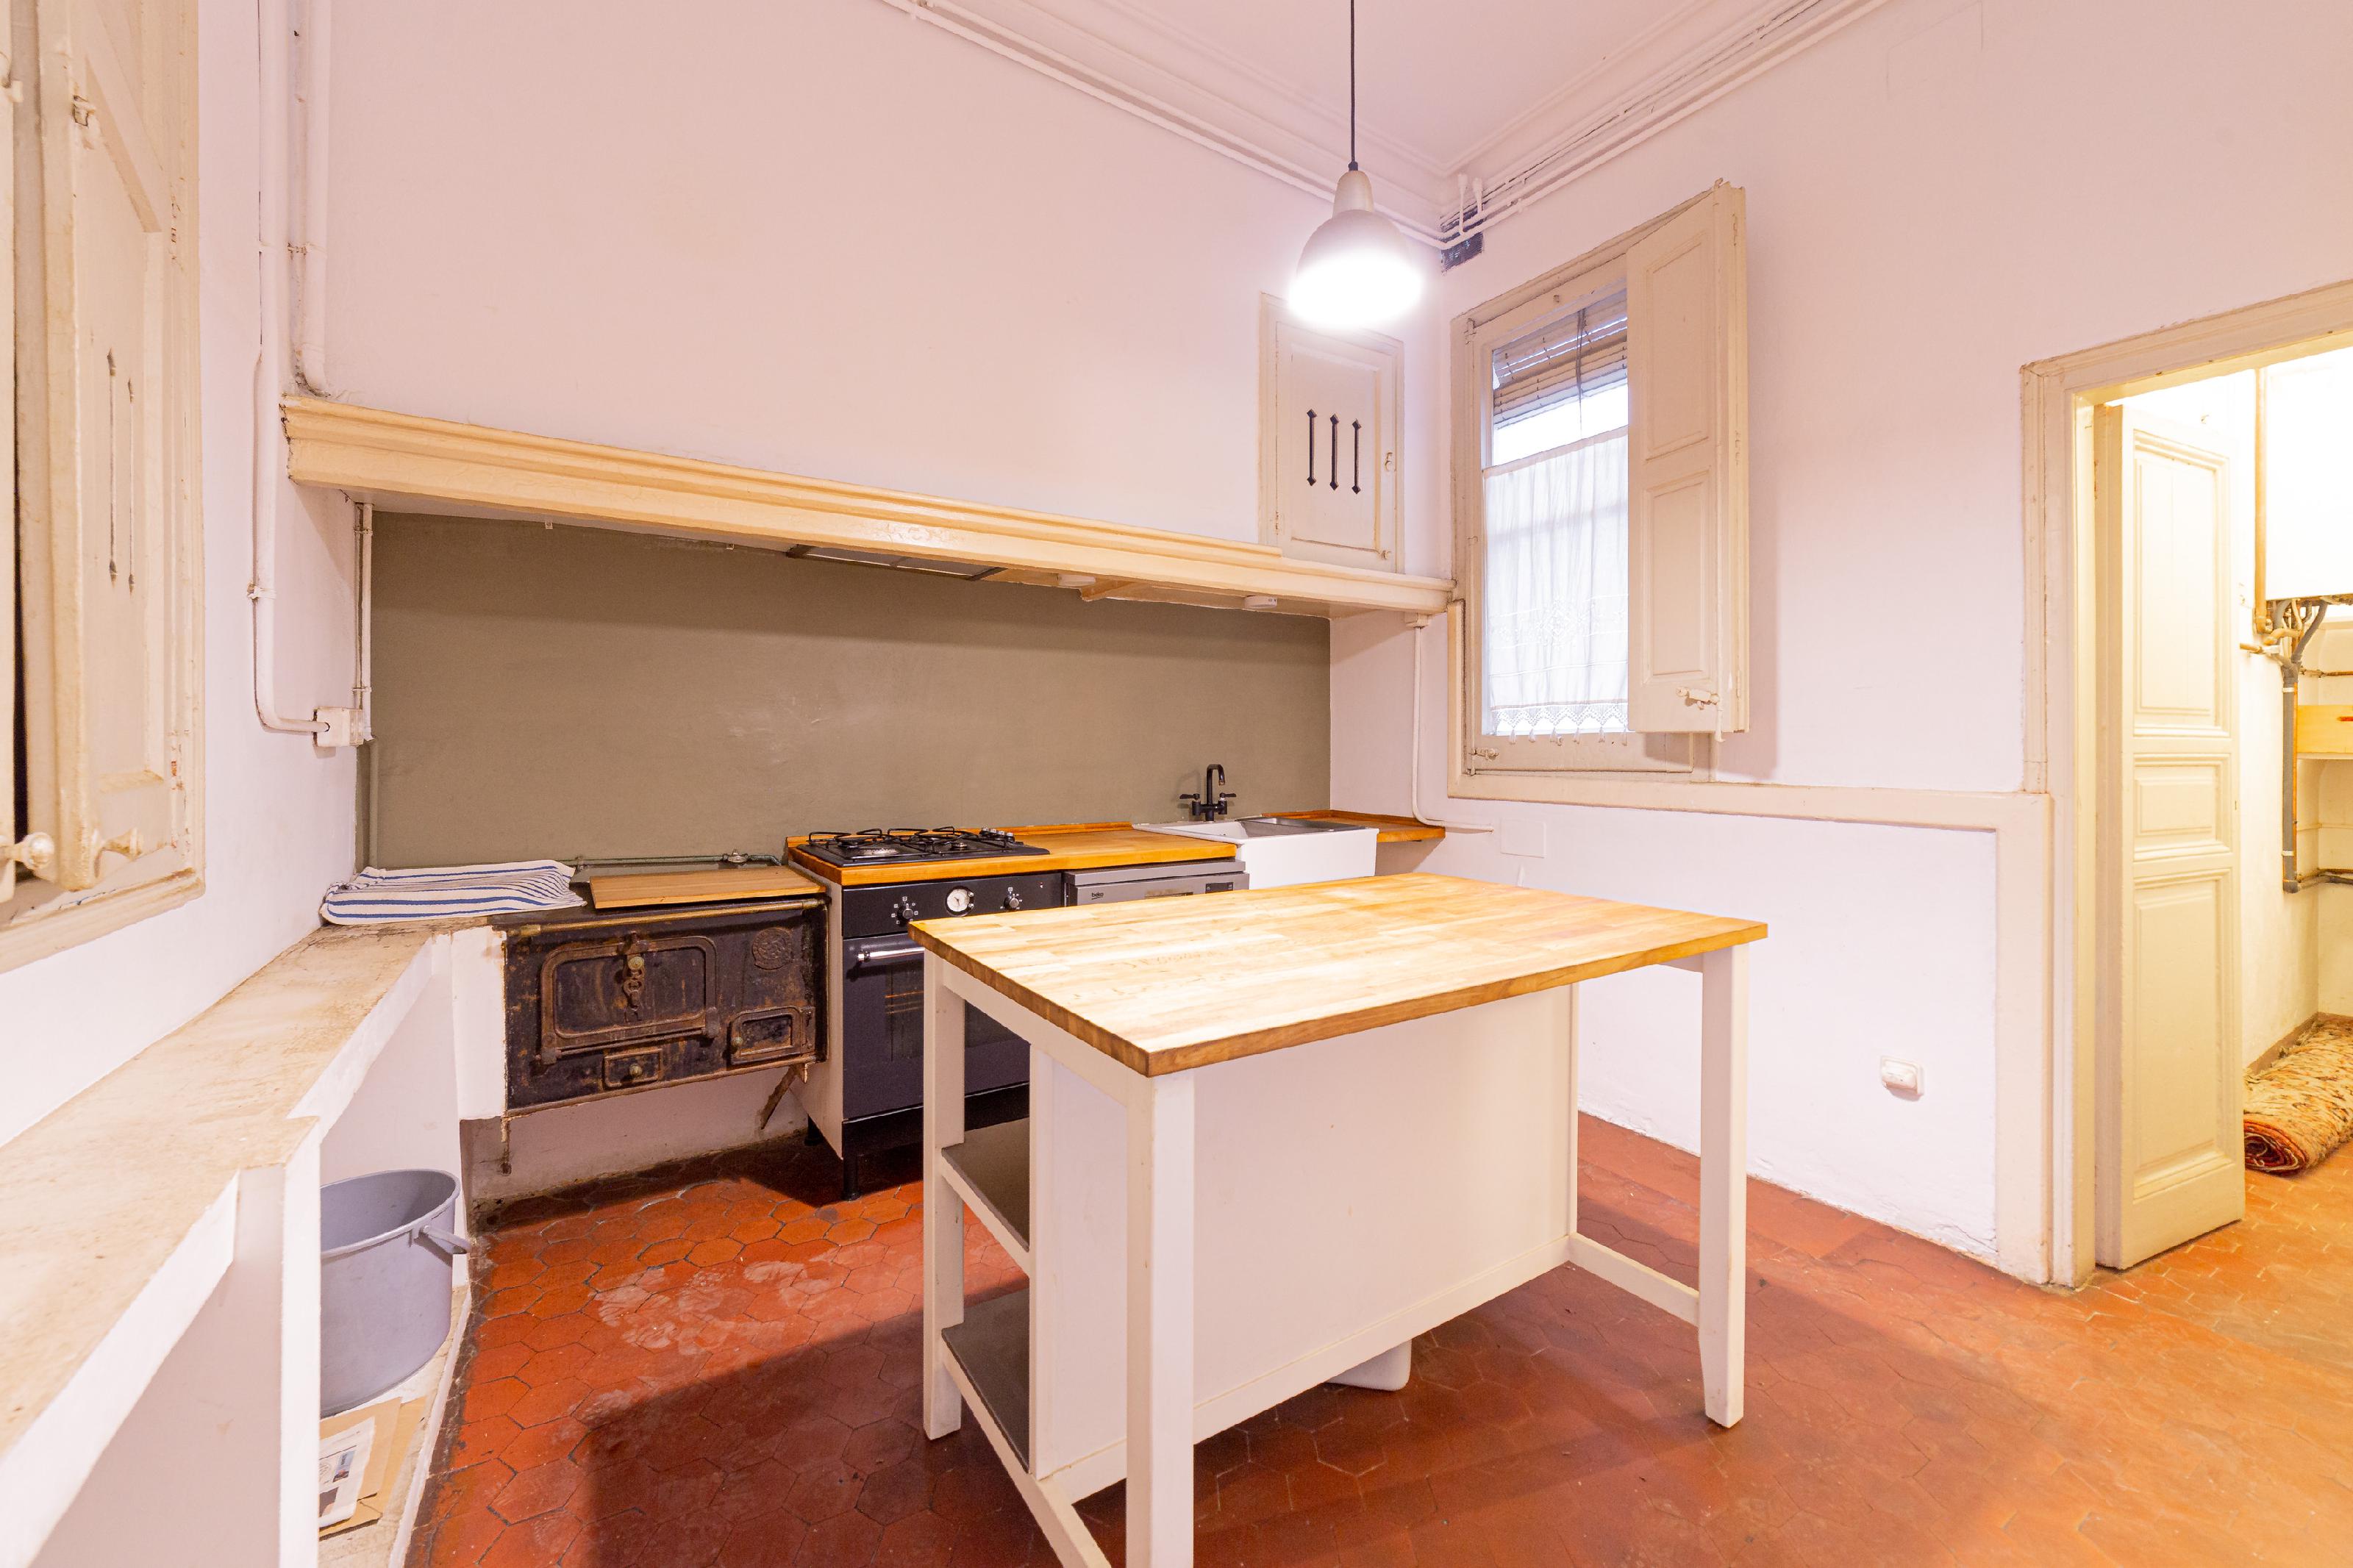 273416 Flat for sale in Eixample, Old Esquerre Eixample 3